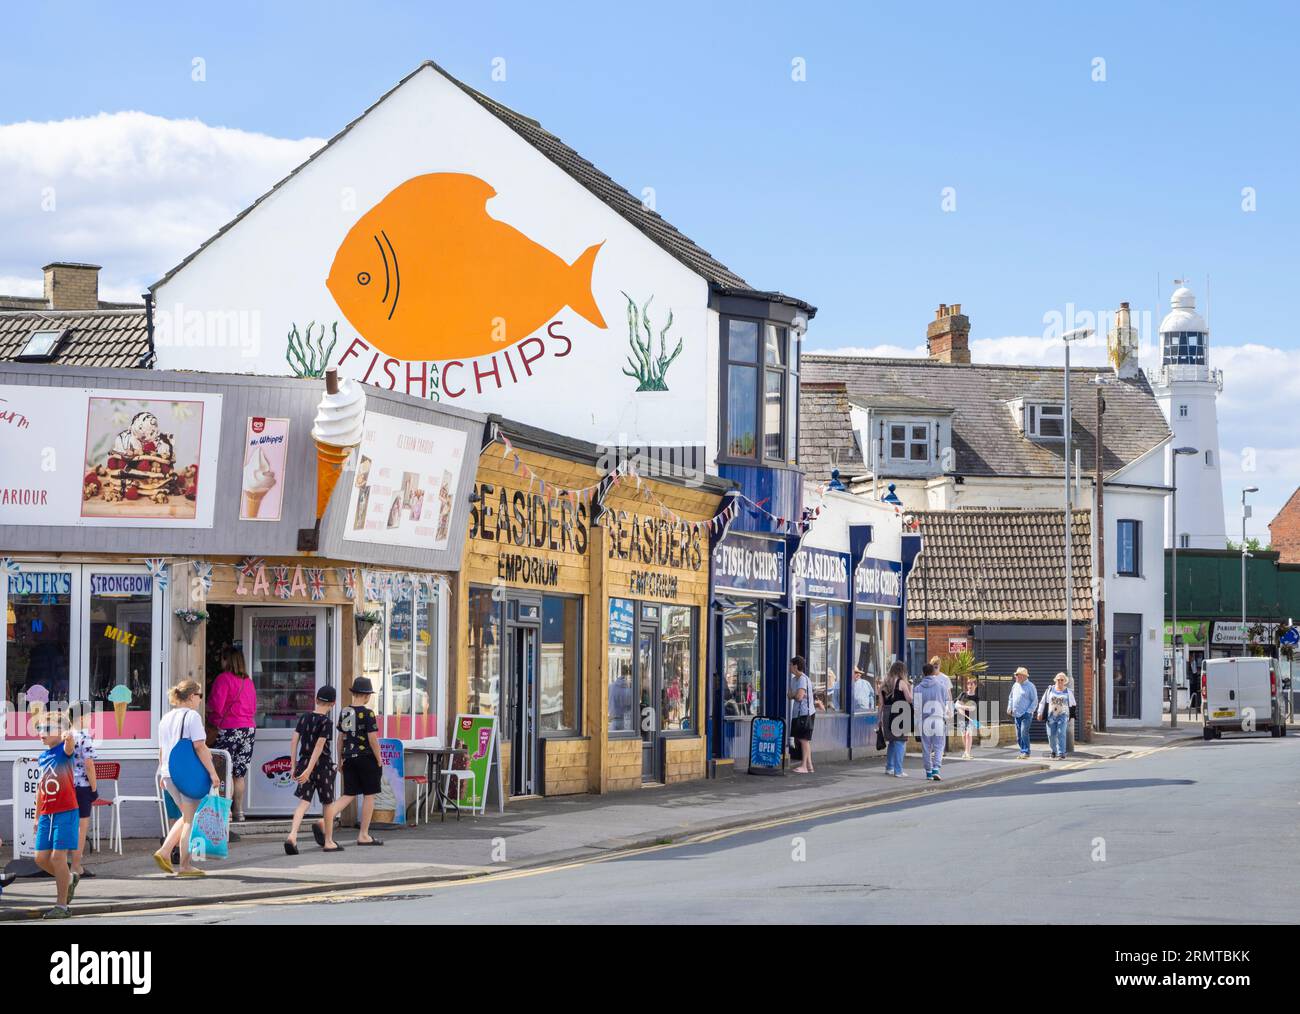 Seasiders Fish and Chip shop and takeaway Seaside road Withernsea East Riding of Yorkshire England UK GB Europe Stock Photo